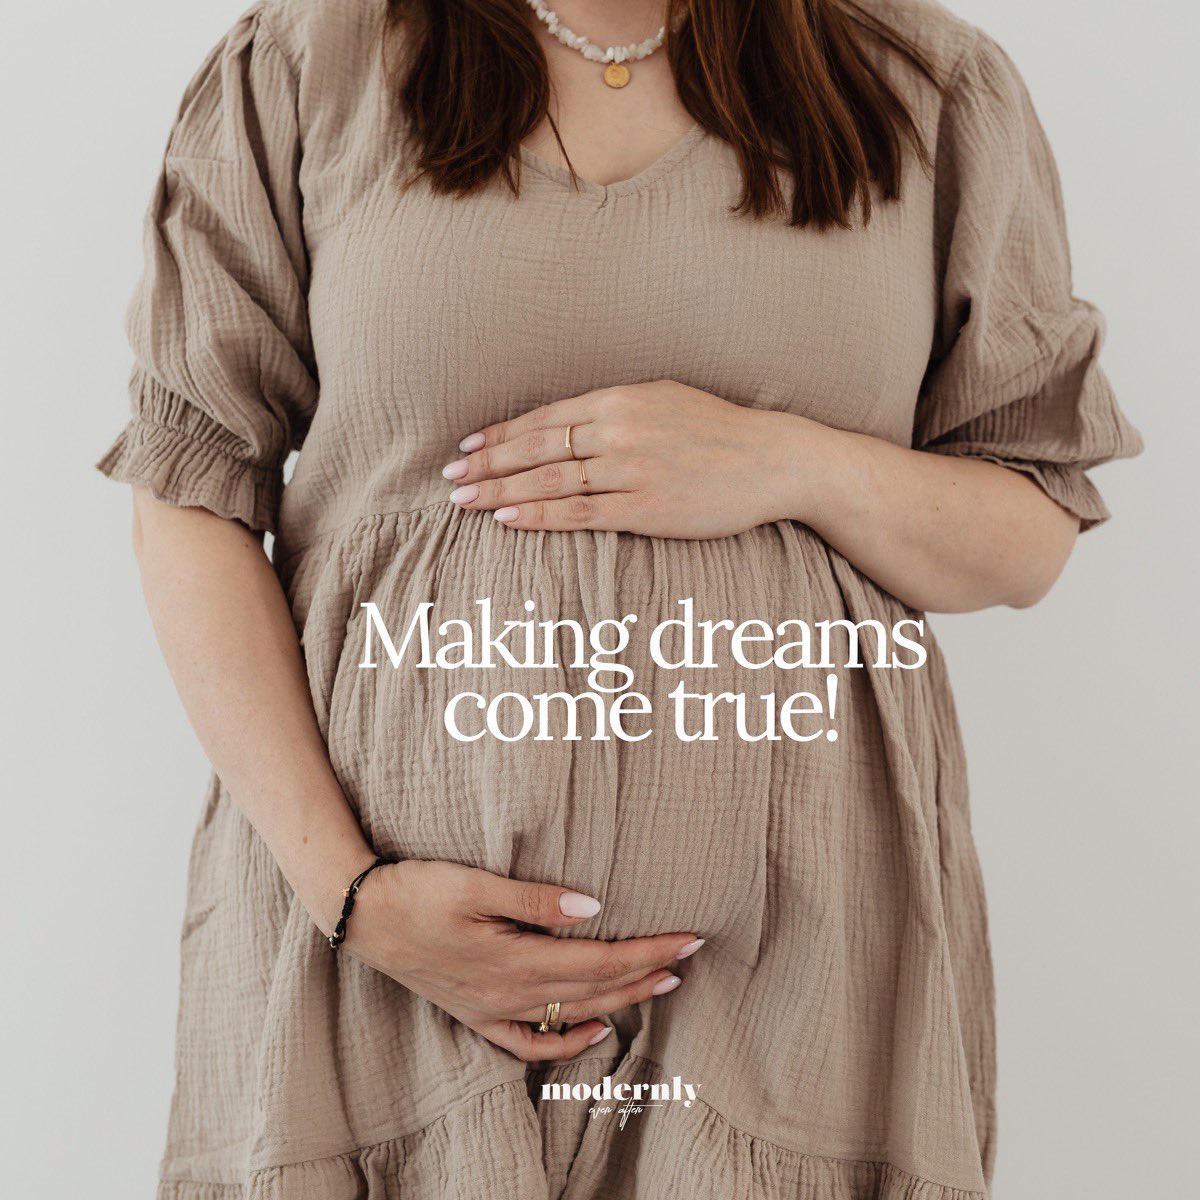 Making the dream of parenthood come true could be your purpose! 

Learn more about how you can make the dream of parenthood come true for another family!  modernlyeverafter.com/apply-to-becom…

#surrogacy #surrogacyawarenessmonth #becomeasurrogate #modernlyeverafter #makedremscometrue #ivf